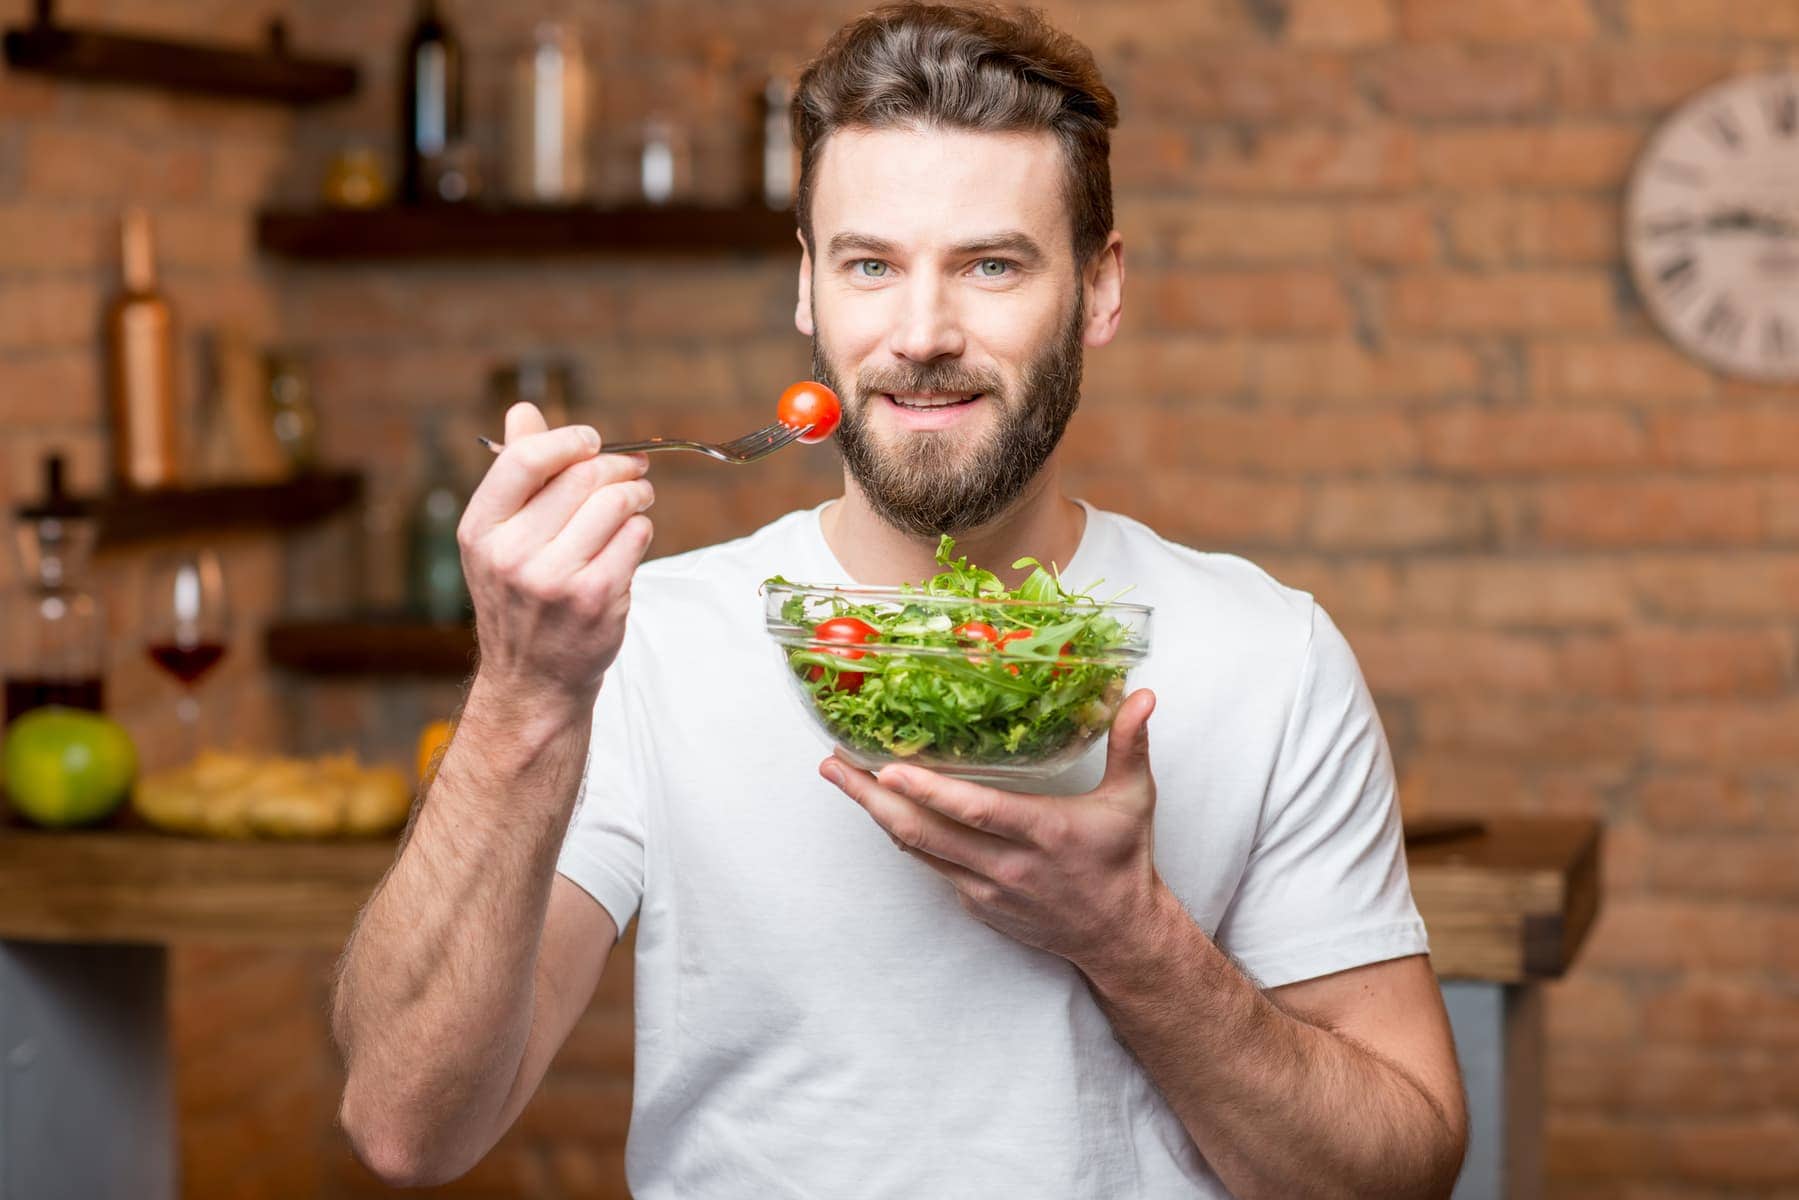 Food and fitness play a role in the health of men